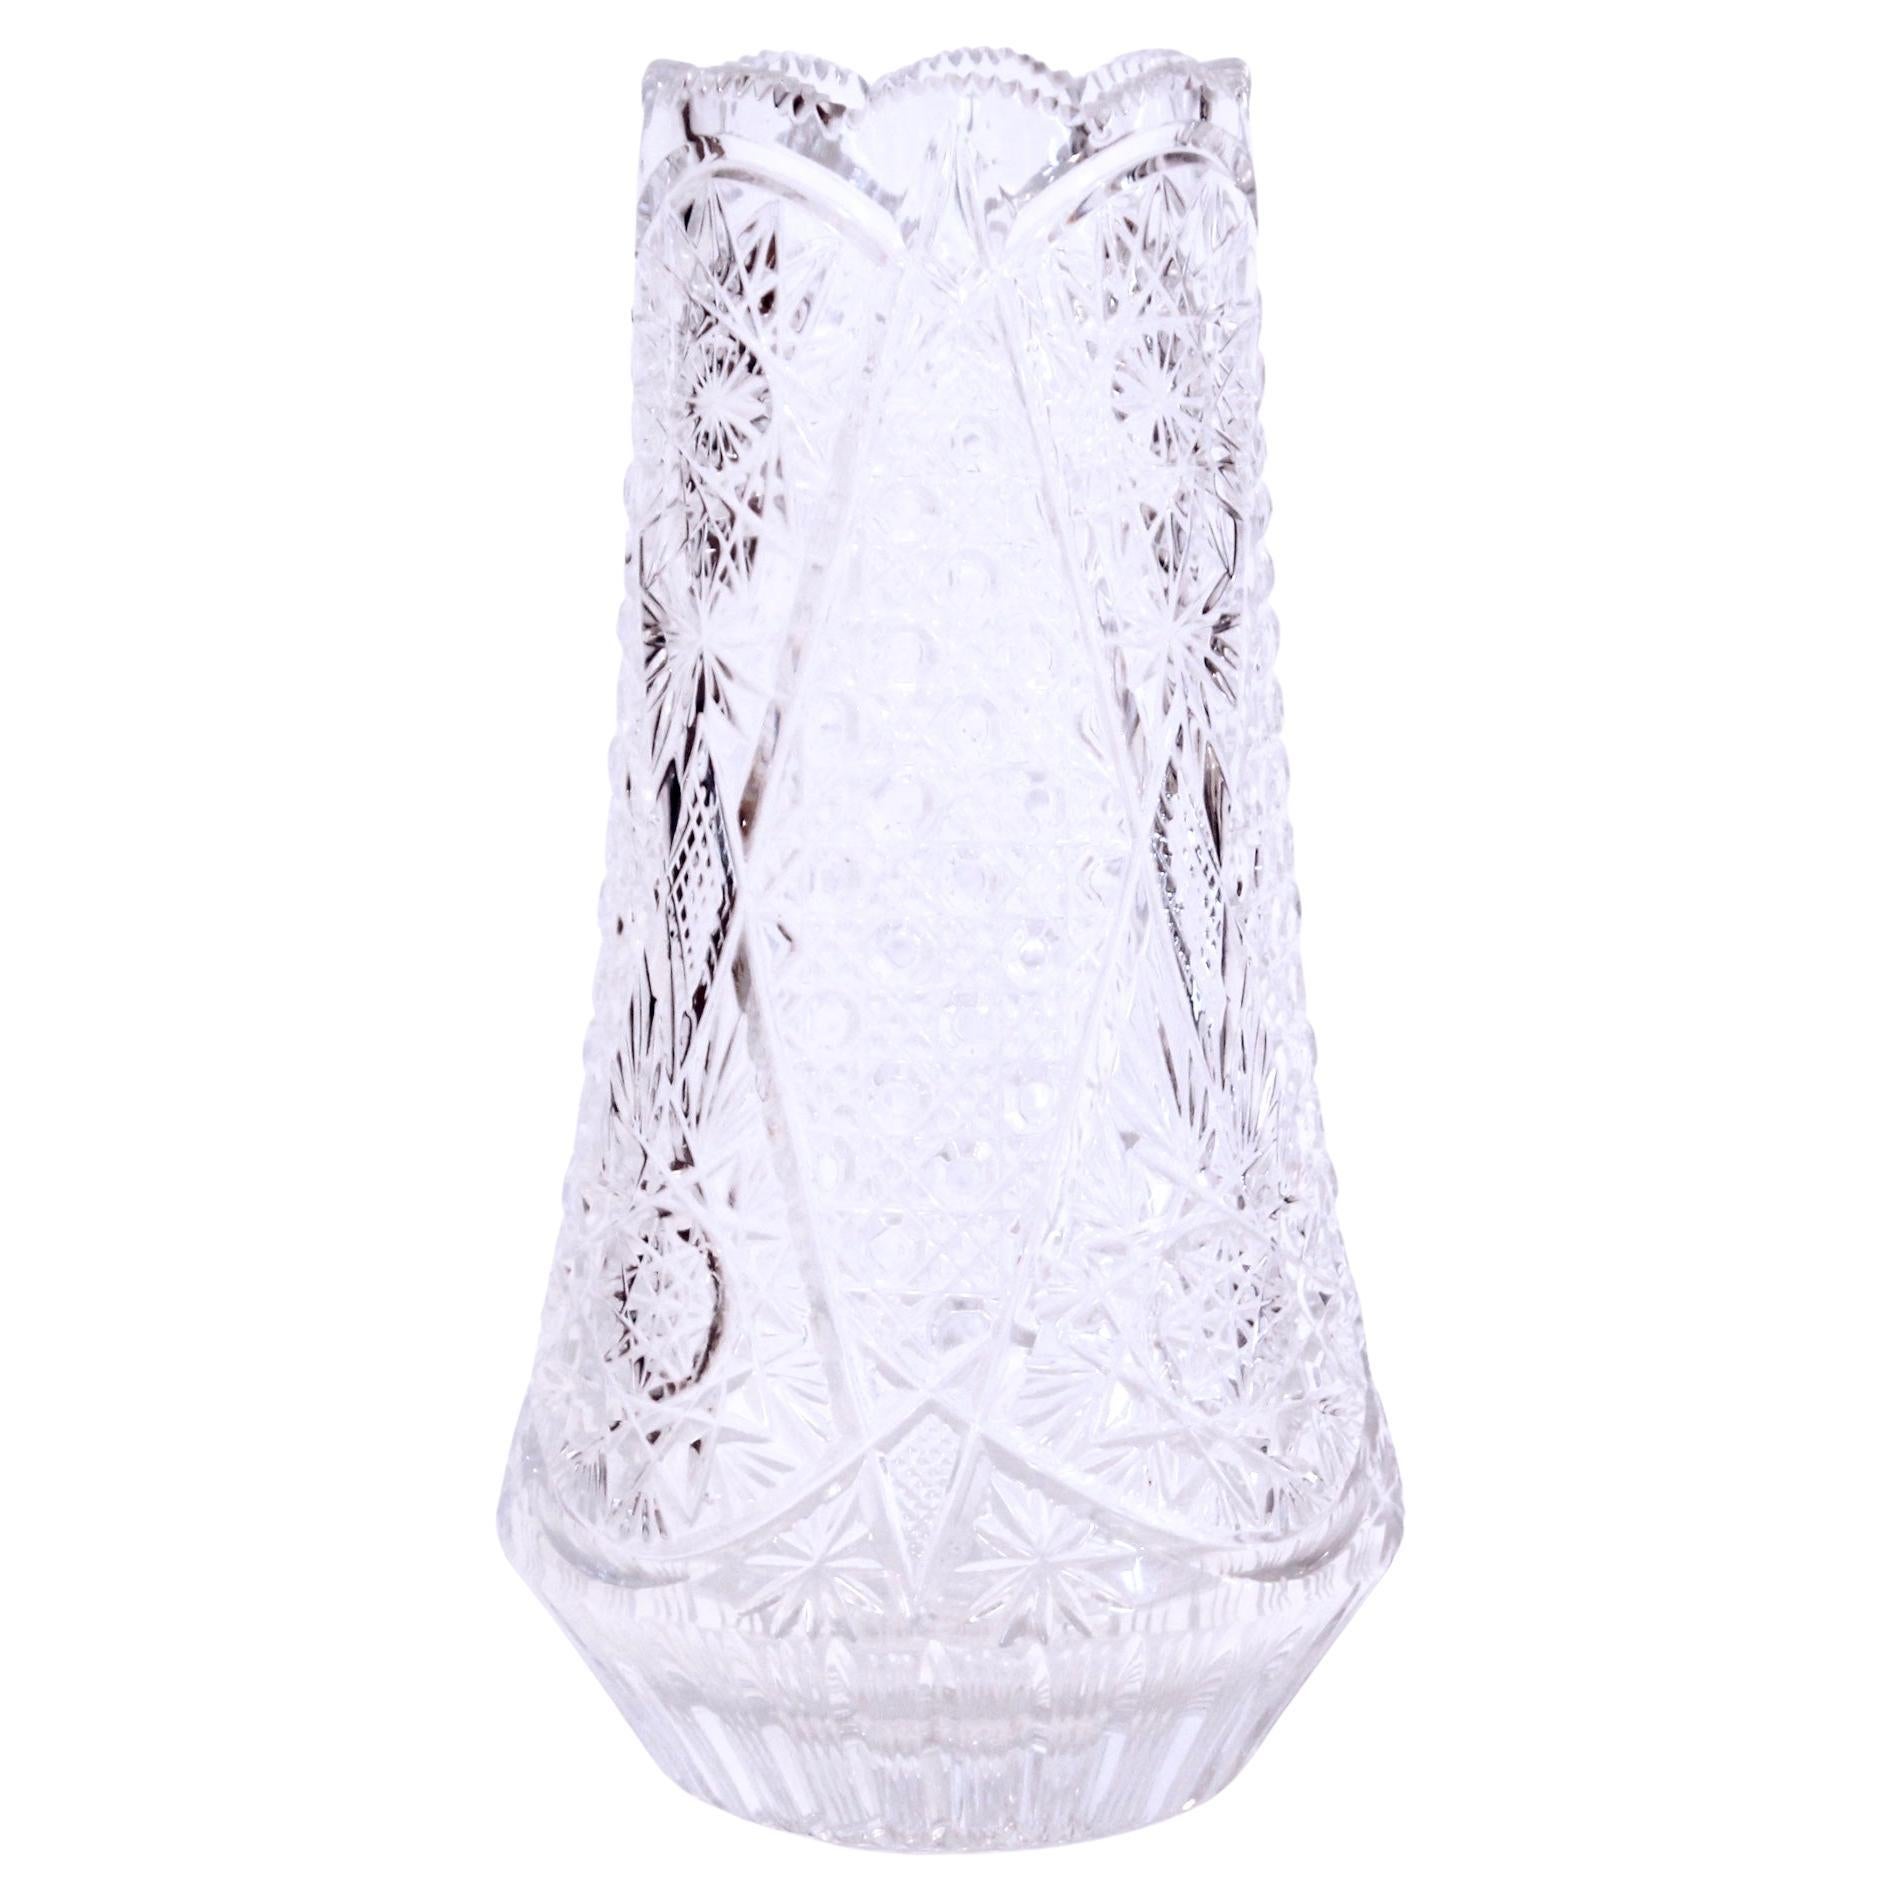 American Brilliant Cut Style Moulded Tall Glass Vase